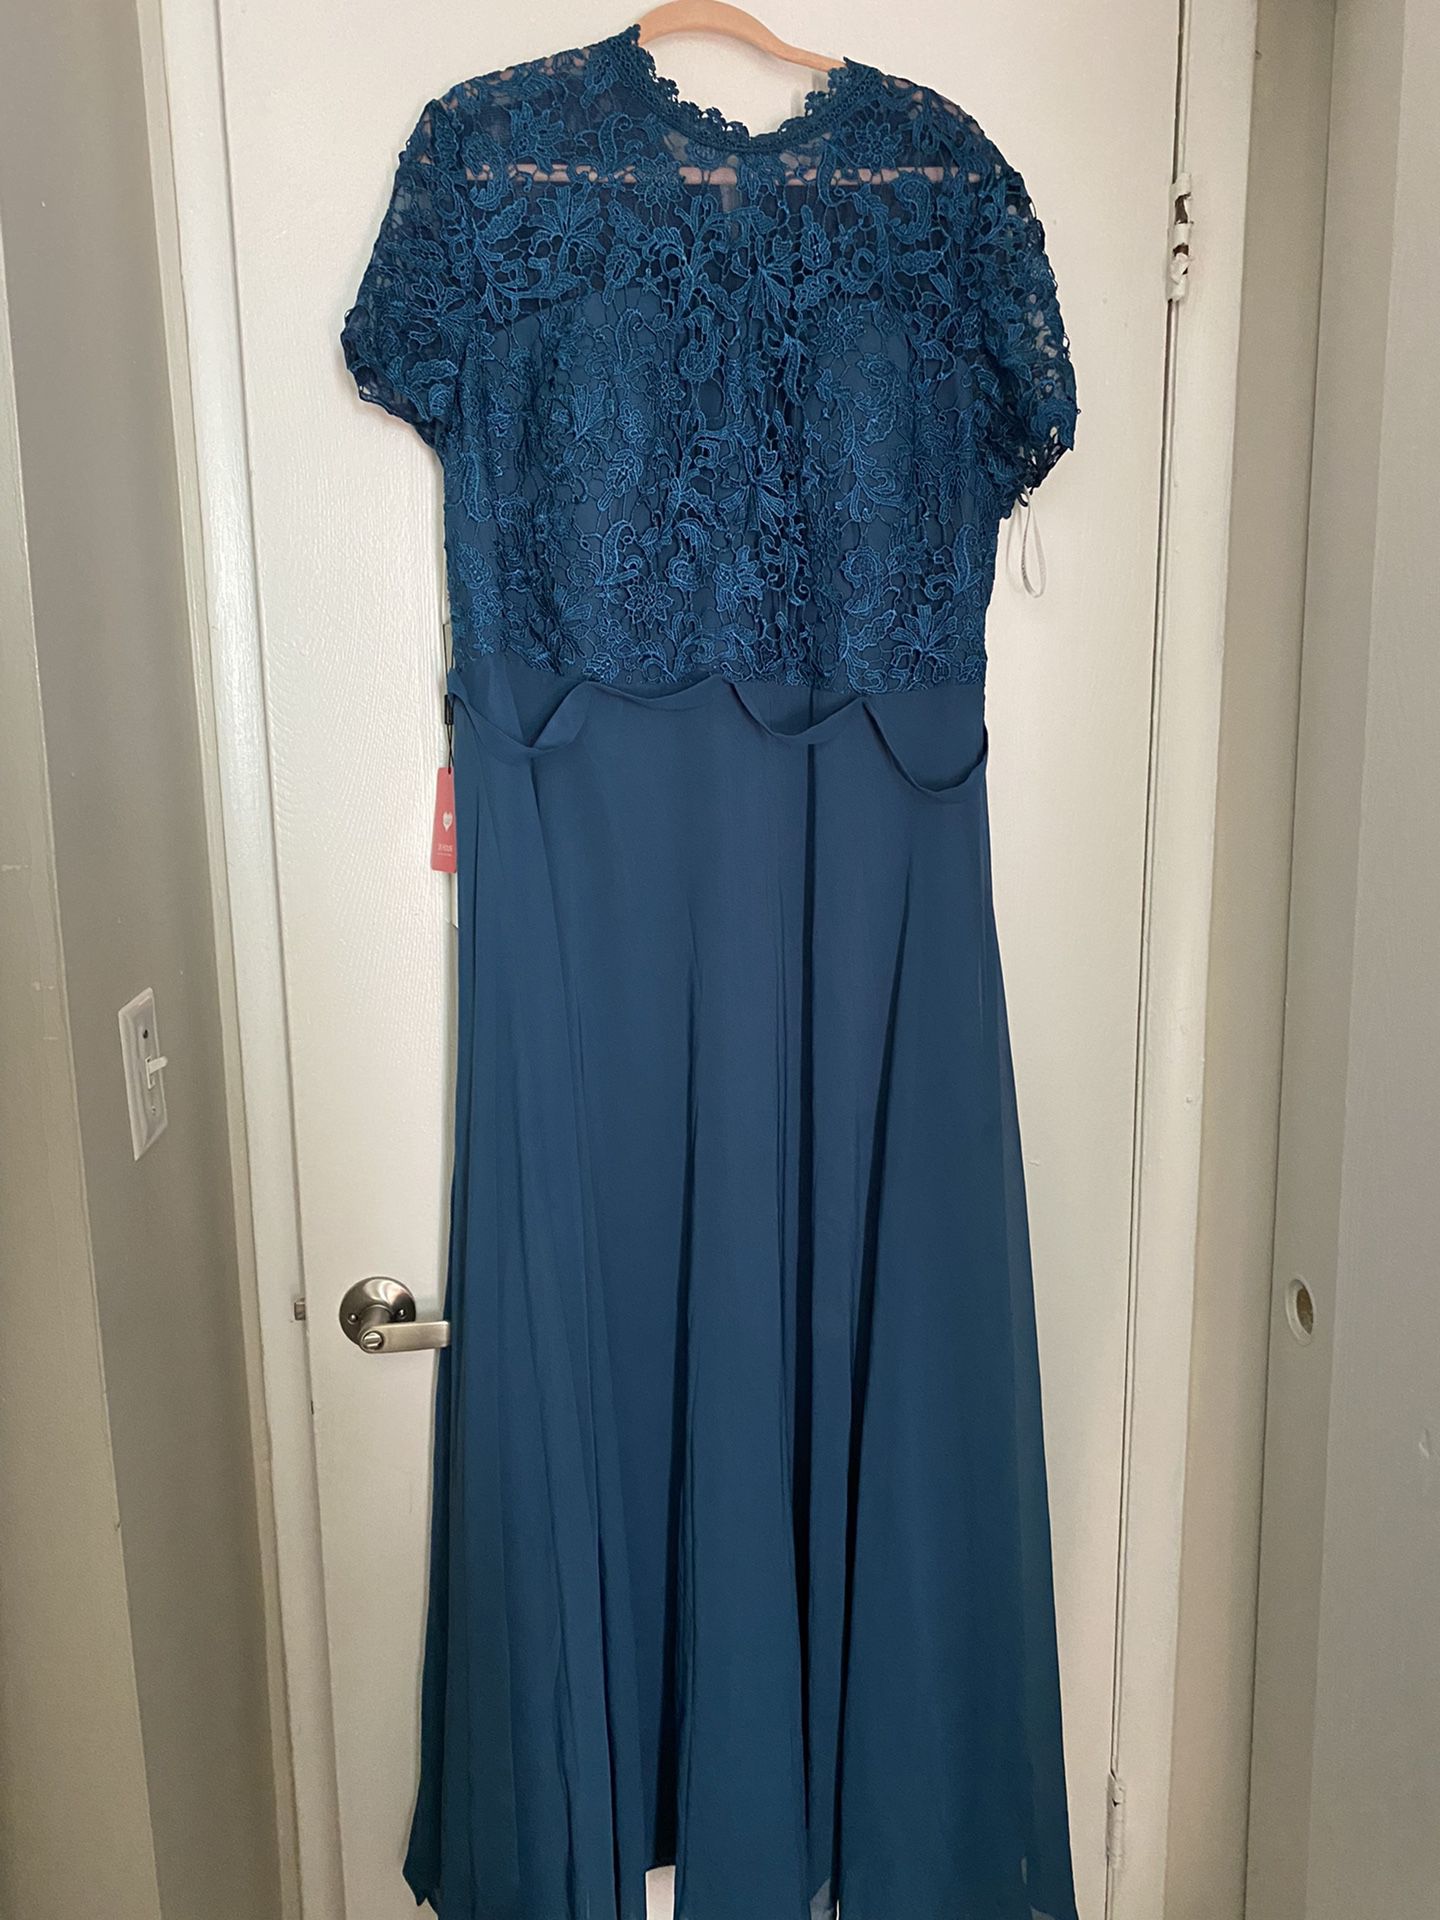 Formal Teal Blue Gown Women’s Dize 24. Brand New. Never Worn. Bought For Wedding Reception and Decided On A Different Style.